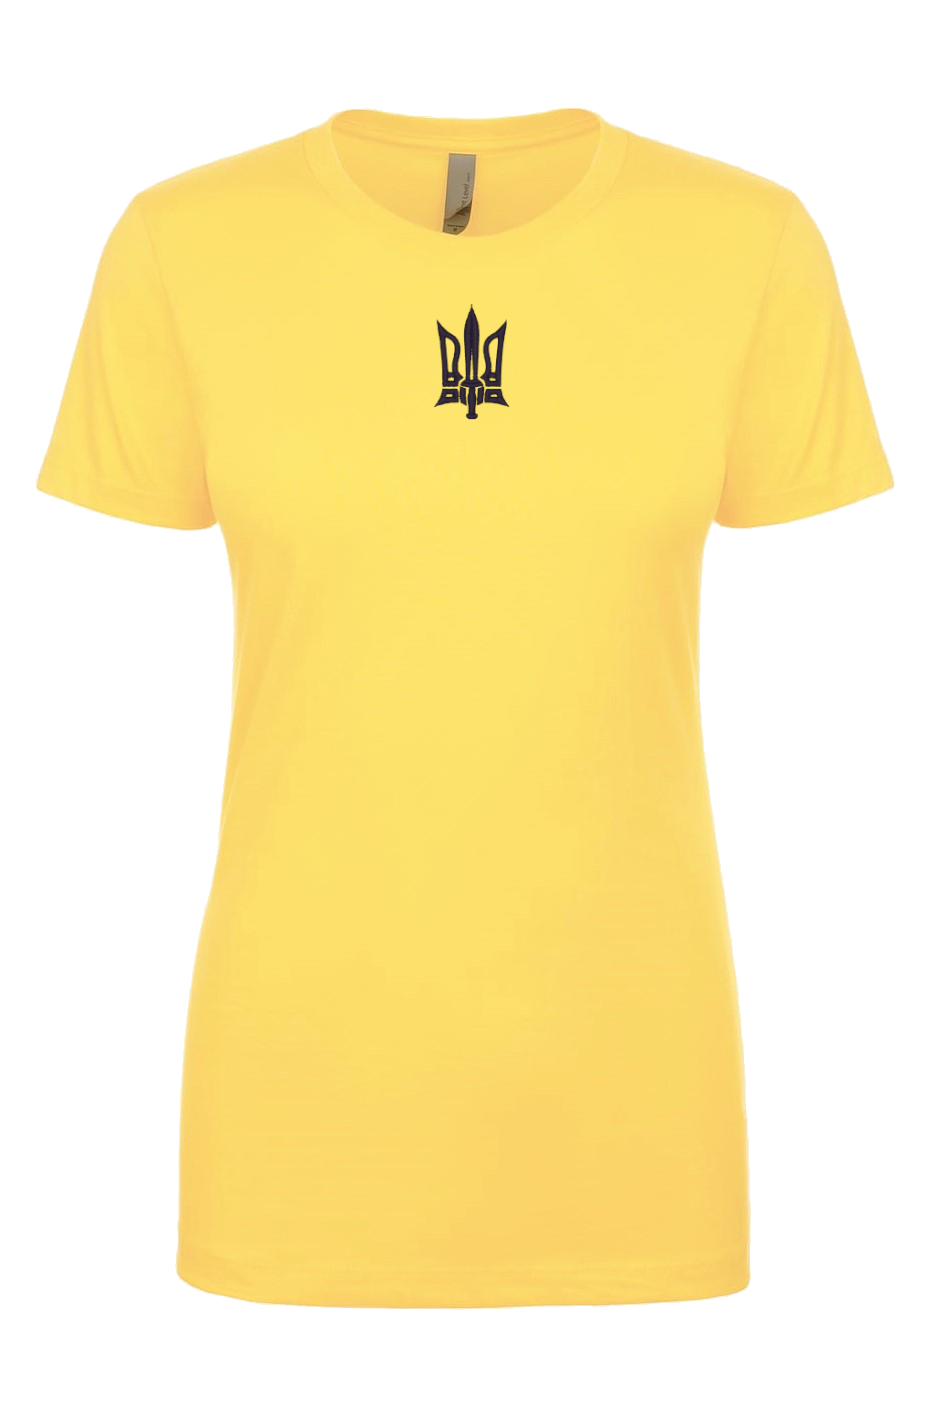 Female fit embroidered t-shirt "Tryzub"